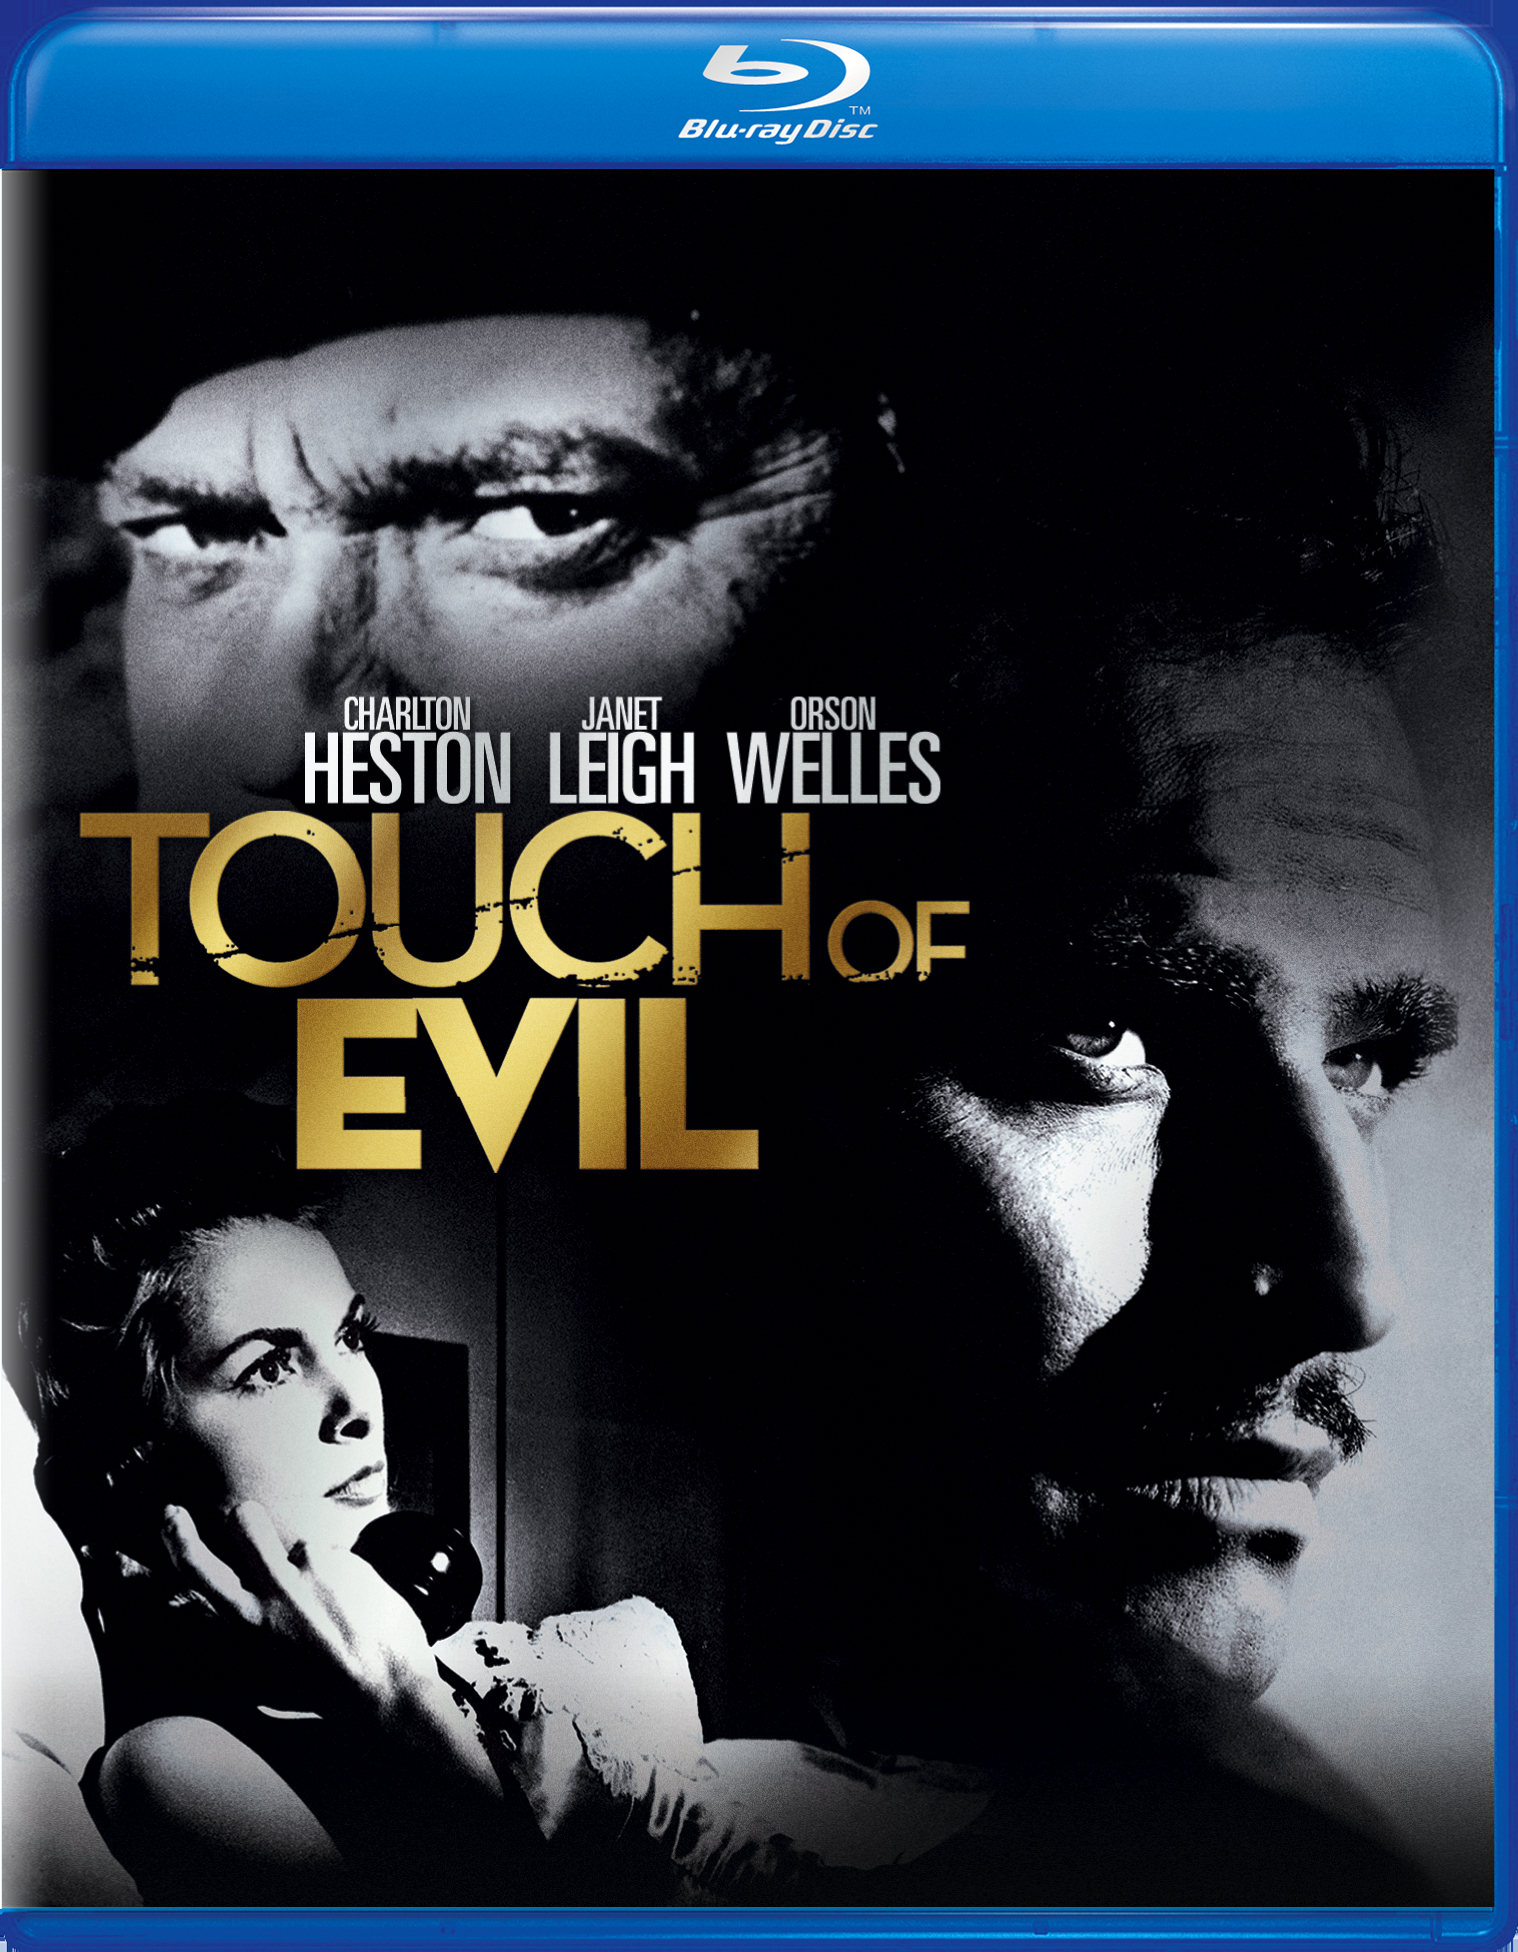 Touch Of Evil - Blu-ray [ 1958 ]  - Modern Classic Movies On Blu-ray - Movies On GRUV